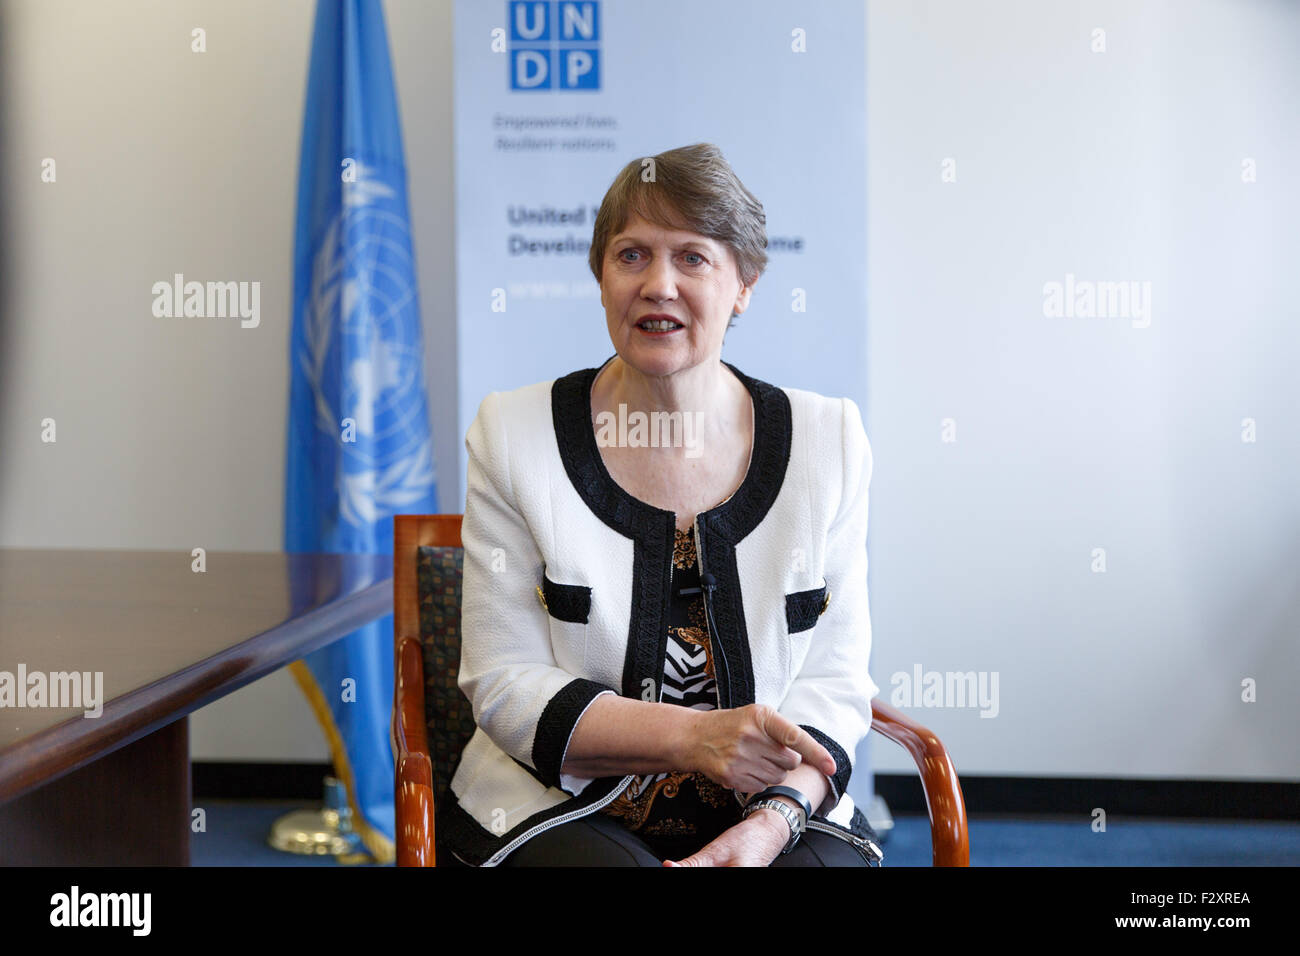 (150925) -- NEW YORK, Sept. 25, 2015 (Xinhua) -- Administrator of UN Development Program Helen Clark speaks during an interview with Xinhua at the UNDP headquarters in New York, the United States, Sept. 22, 2015. Thanks to China's own rapid development and its significant contribution to South-South cooperation, China has such a big role to play in UN affairs and the role will get bigger, said Helen Clark, administrator of UN Development Program. On Chinese President Xi Jinping's visit to the UN, Clark said 'it is wonderful to have the president of the People's Republic of China come to the UN Stock Photo